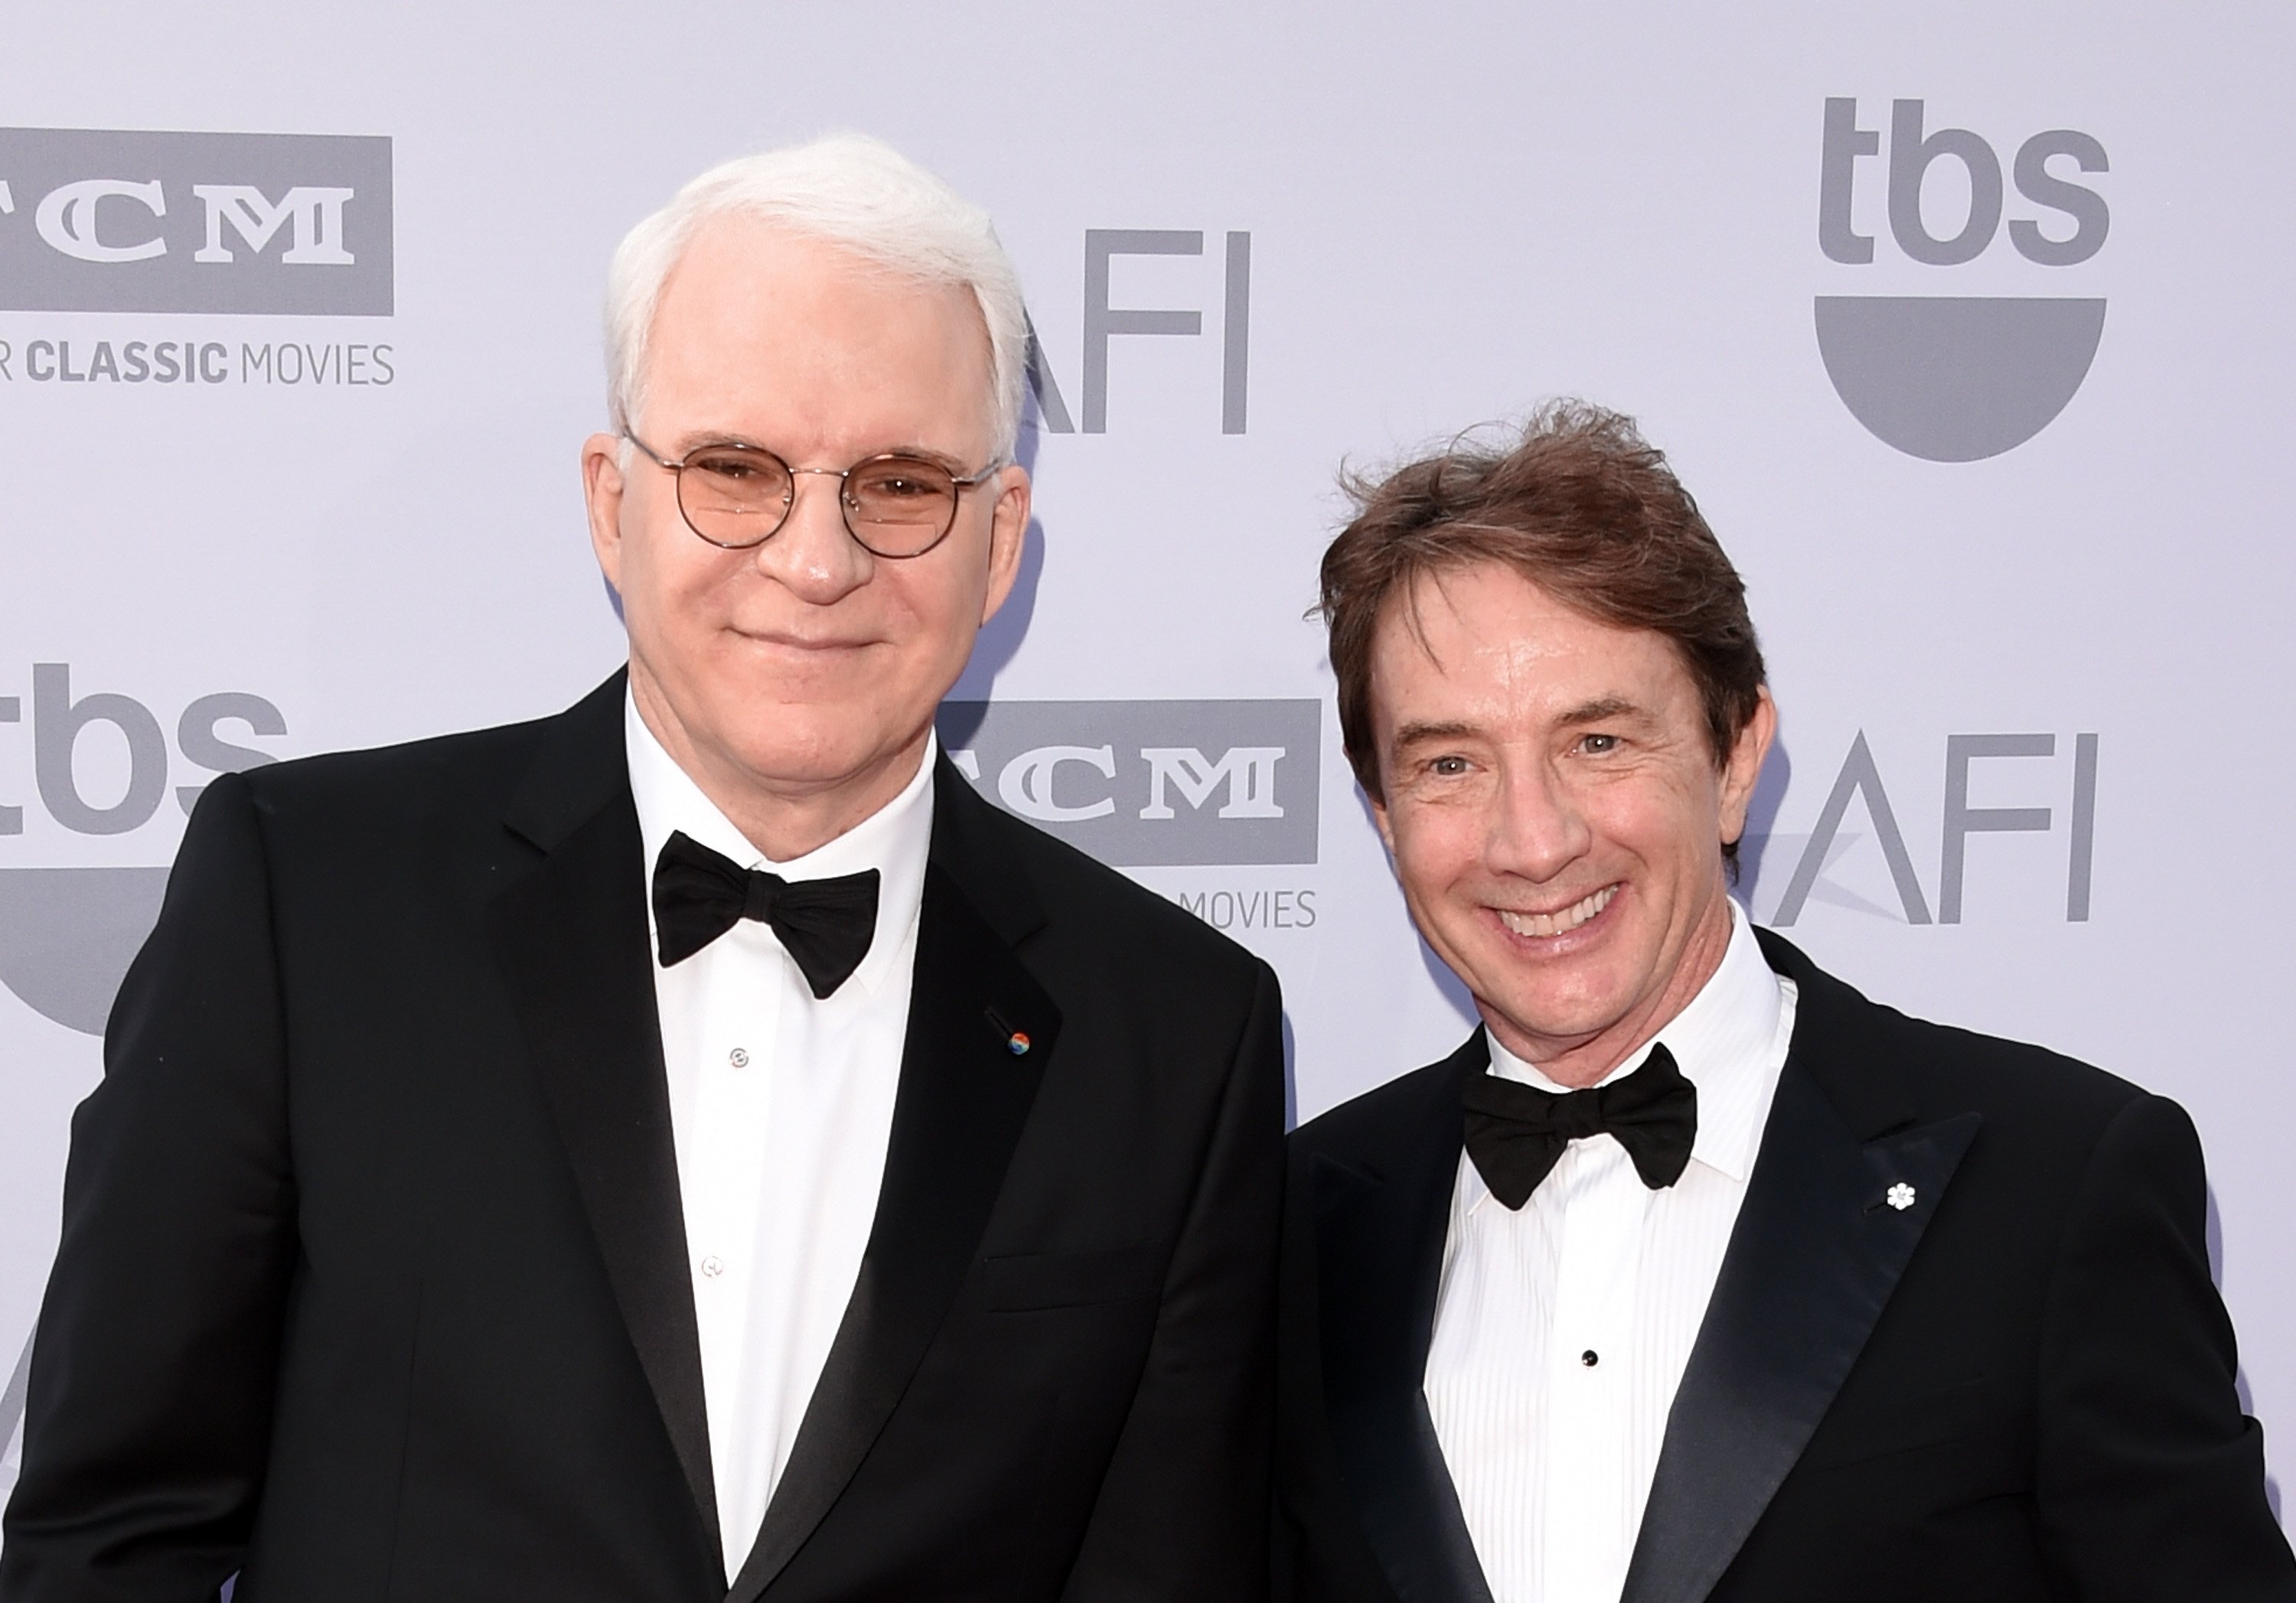 Honoree Steve Martin (L) and actor Martin Short attend the 2015 AFI Life Achievement Award Gala Tribute Honoring Steve Martin at the Dolby Theatre on June 4, 2015 in Hollywood, California.| Source: Getty Images